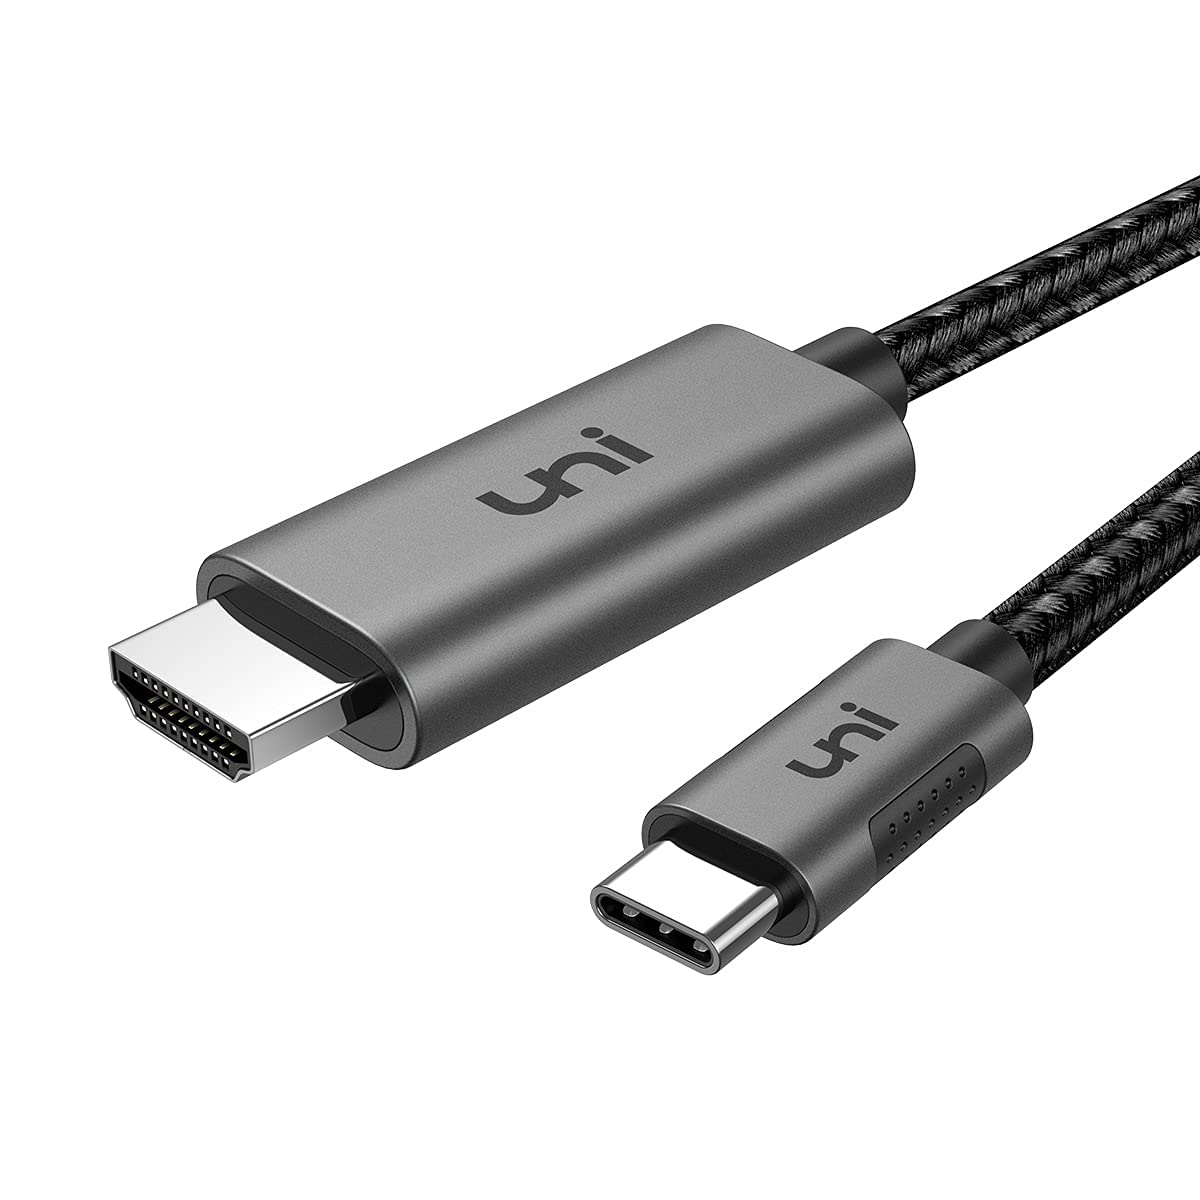  2. Uni Store USB C to HDMI Cables 